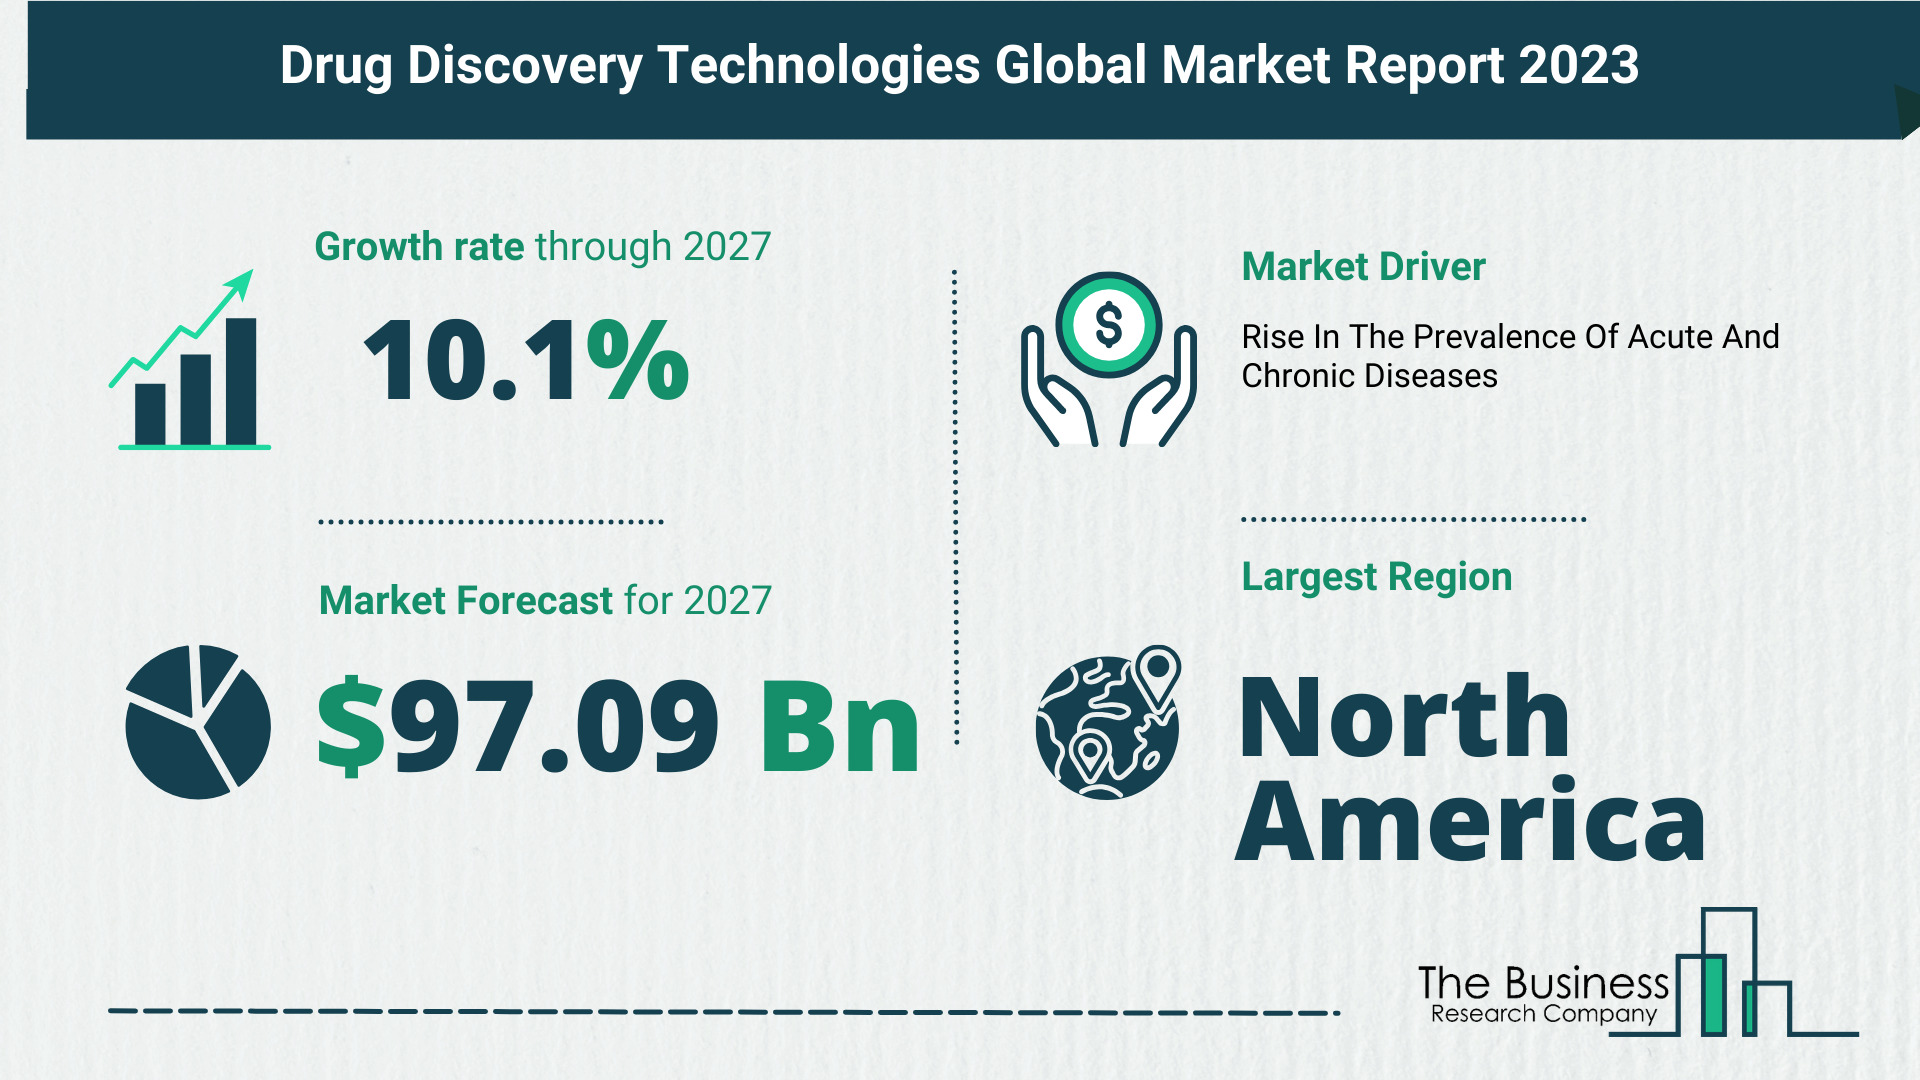 How Is The Drug Discovery Technologies Market Expected To Grow Through 2023-2032